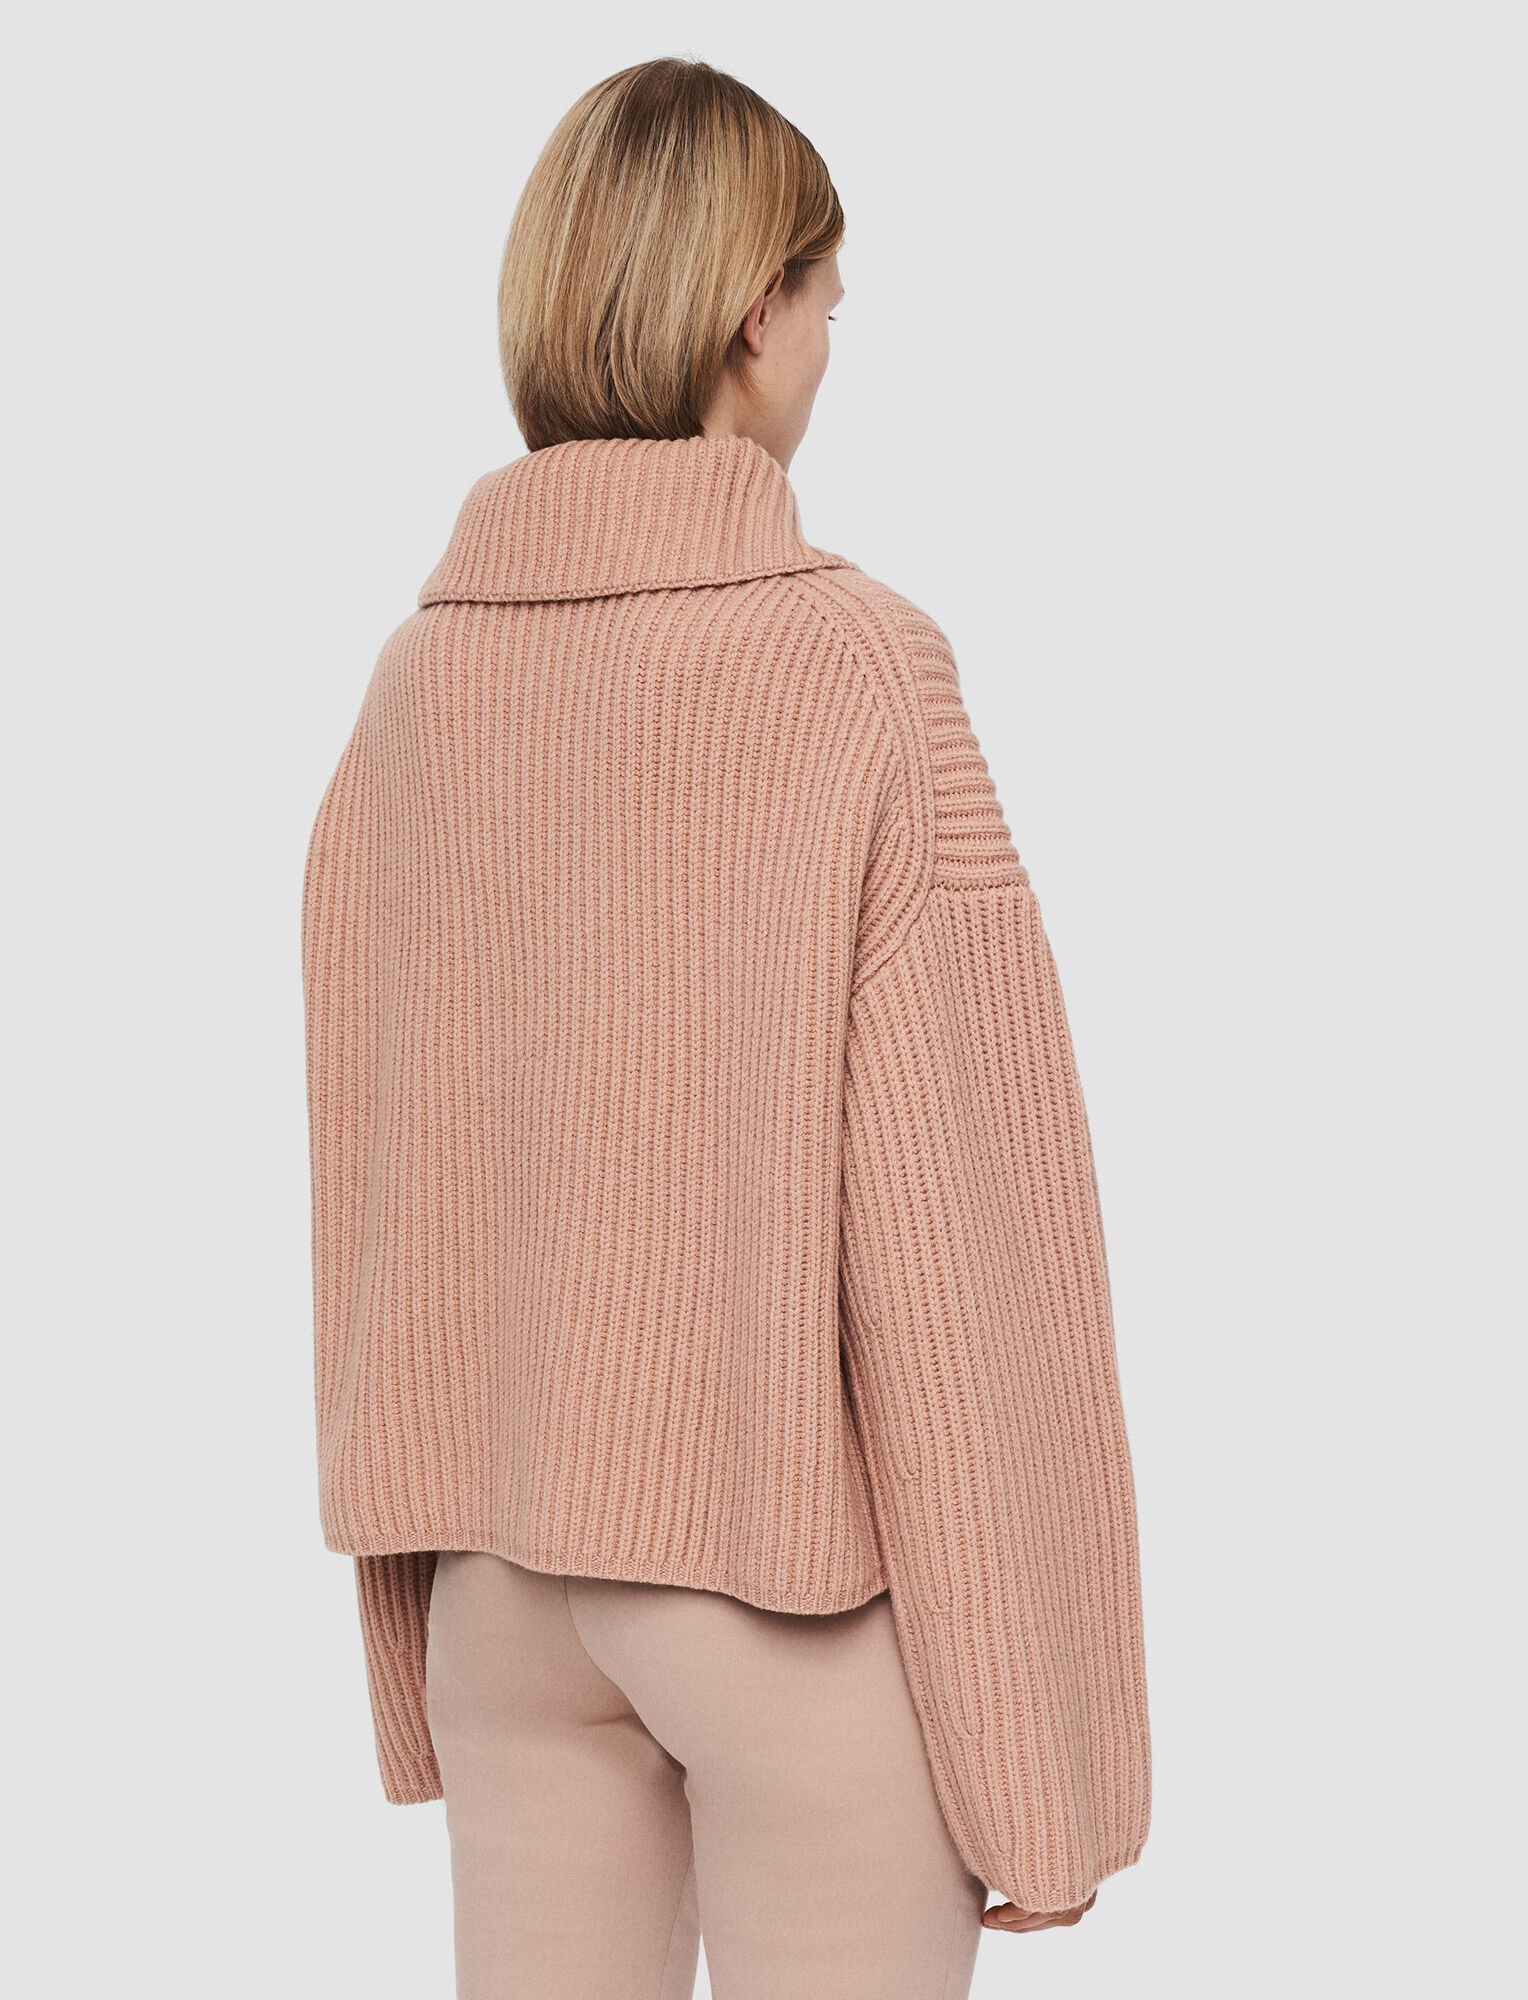 a relaxed fit, oversized knit jumper, crafted from a fine Merino wool. This heavy weight knit has wide sleeves, dropped shoulders, and is finished in a chunky cardigan stitch.